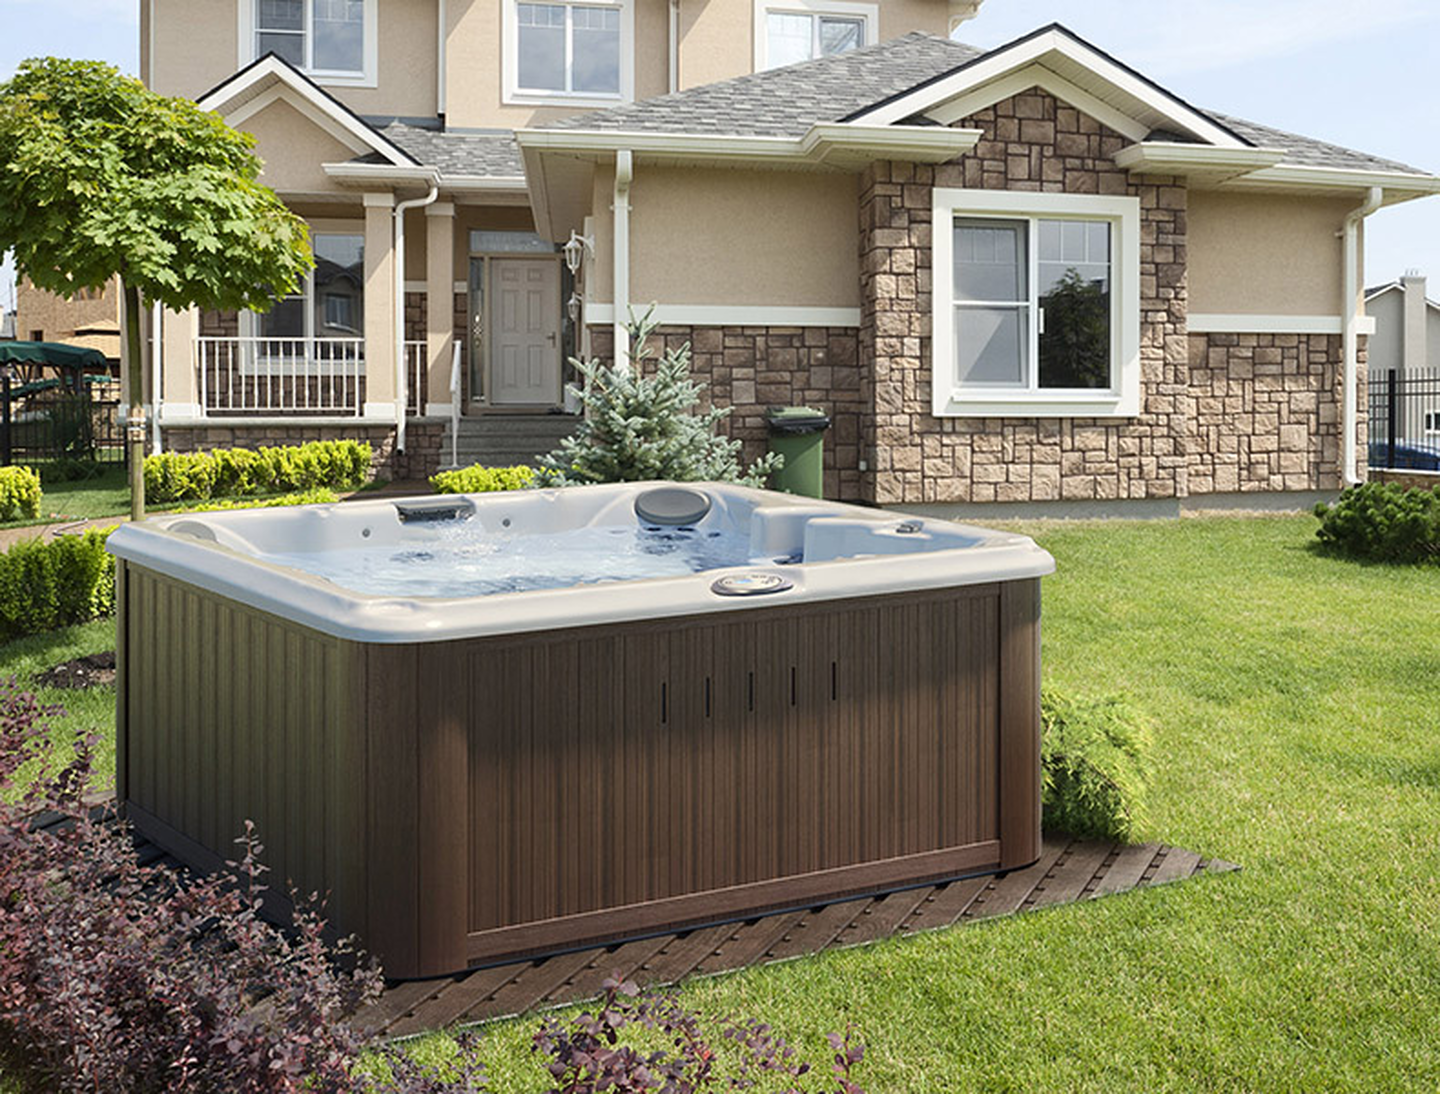 Jacuzzi® Hot Tubs and Spas |Hot Tubs for Sale Near Me| Jacuzzi.com | Jacuzzi ®